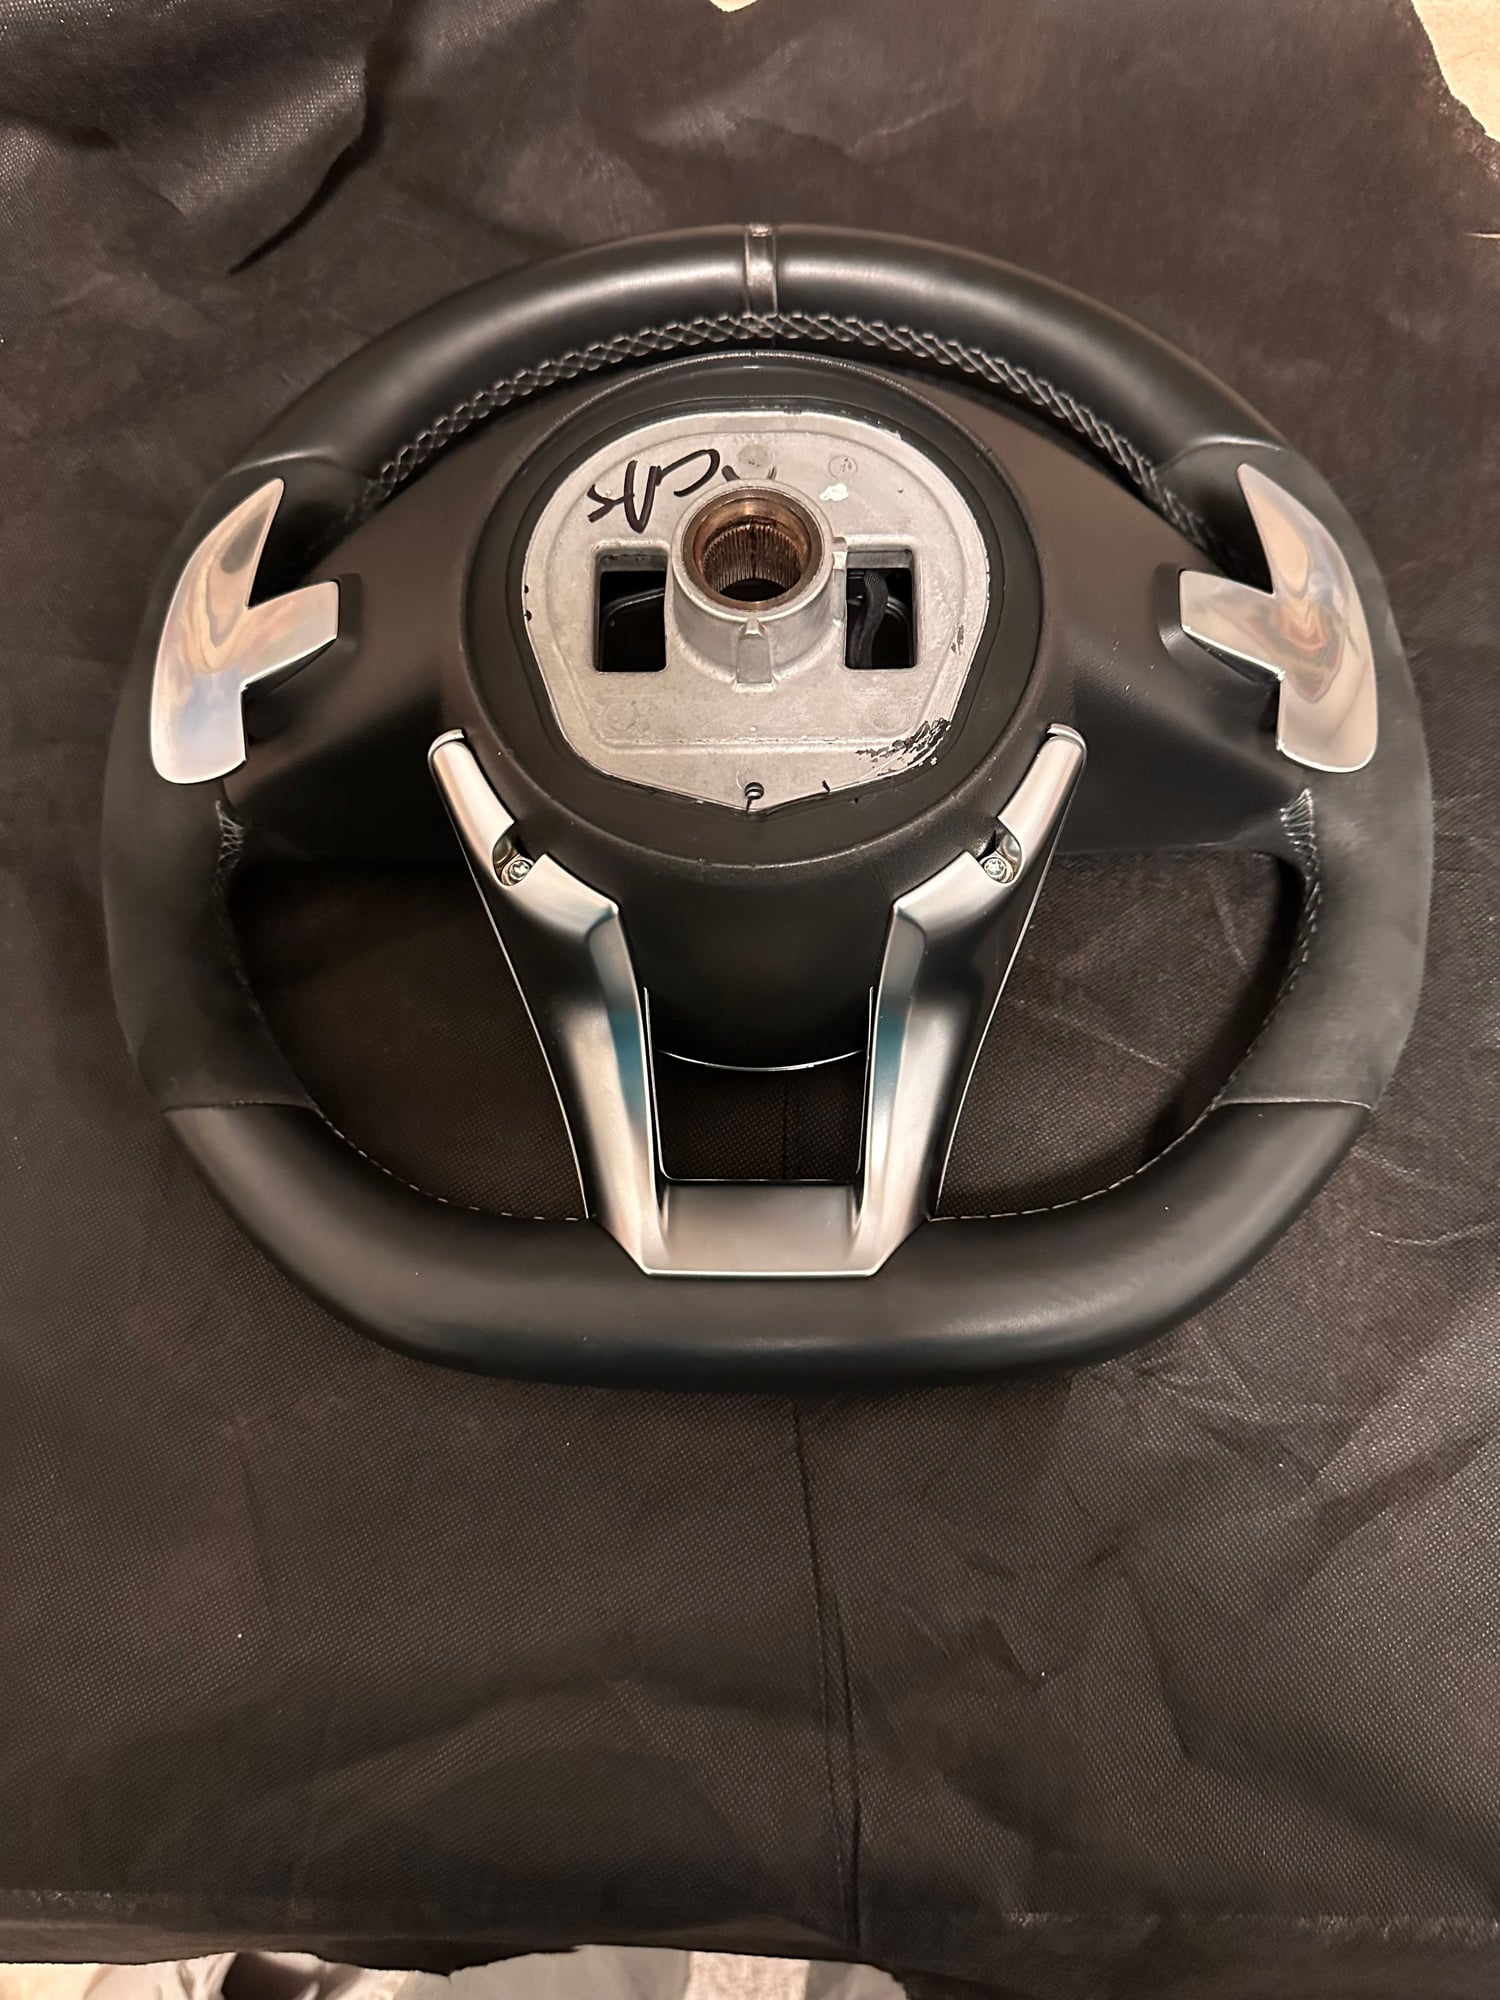 Interior/Upholstery - Mercedes AMG leather /alcantara sterring wheel W166 2012-2019 - Used - 2015 to 2019 Mercedes-Benz GLE63 AMG S - Aurora, CO 80016, United States